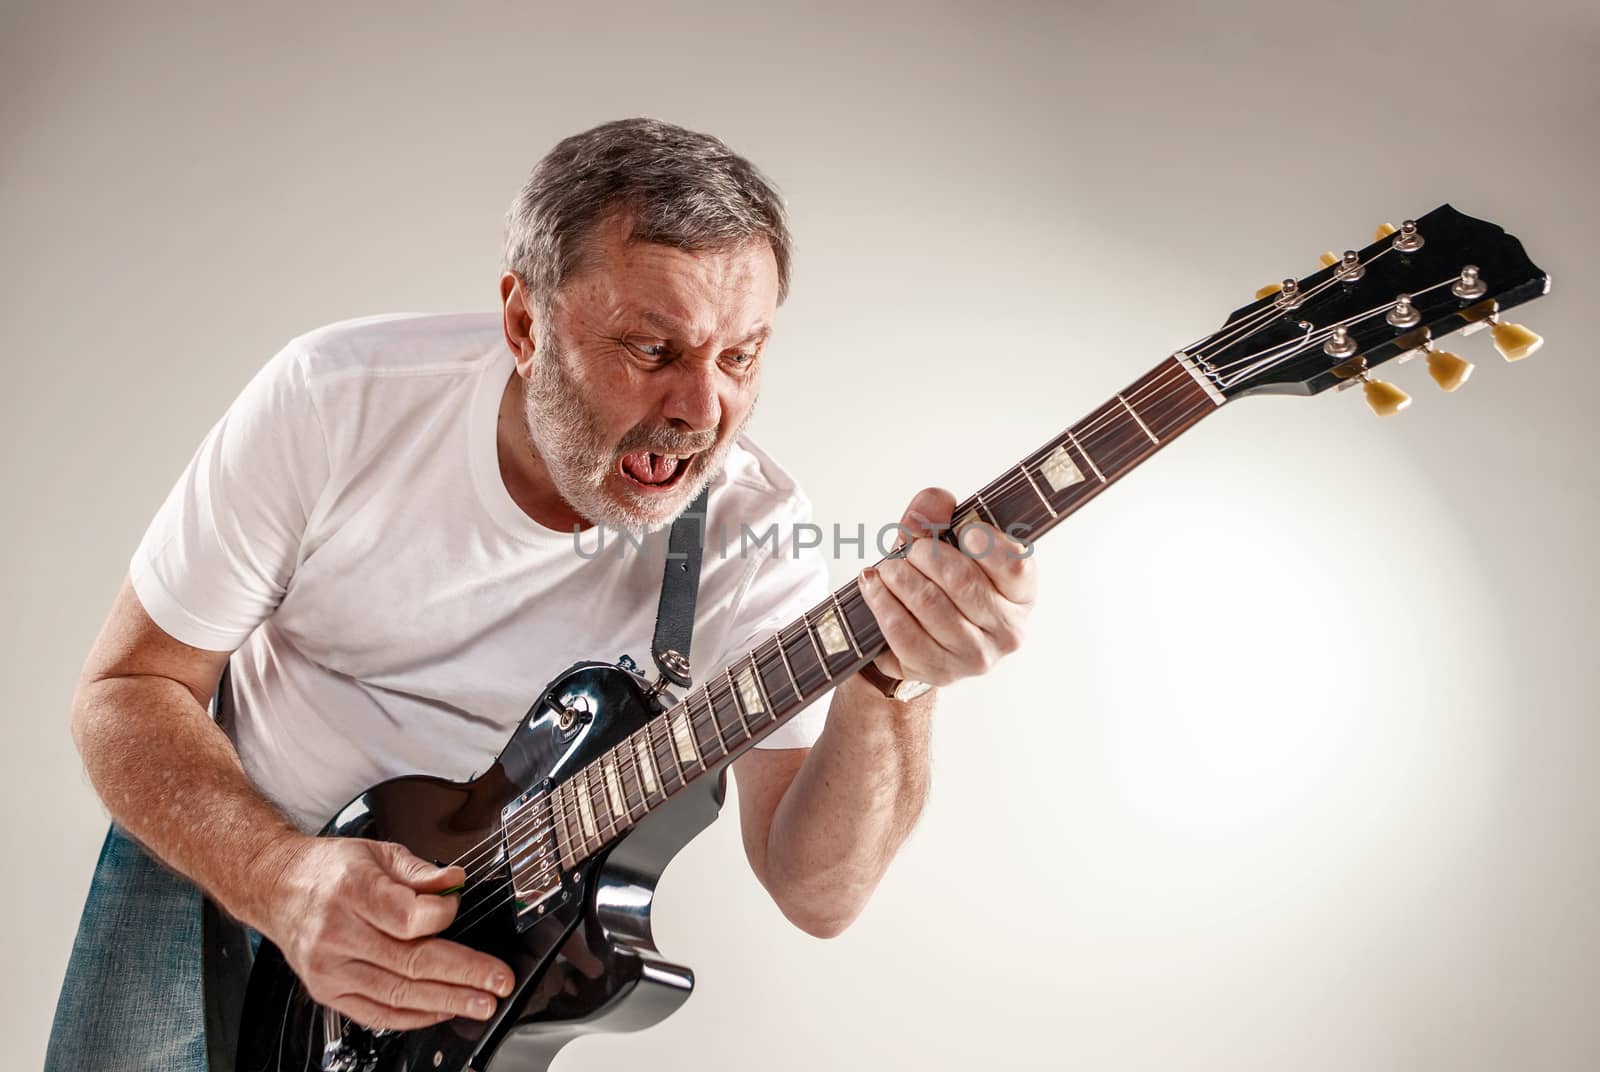 Portrait of a guitar player exciting music on gray background